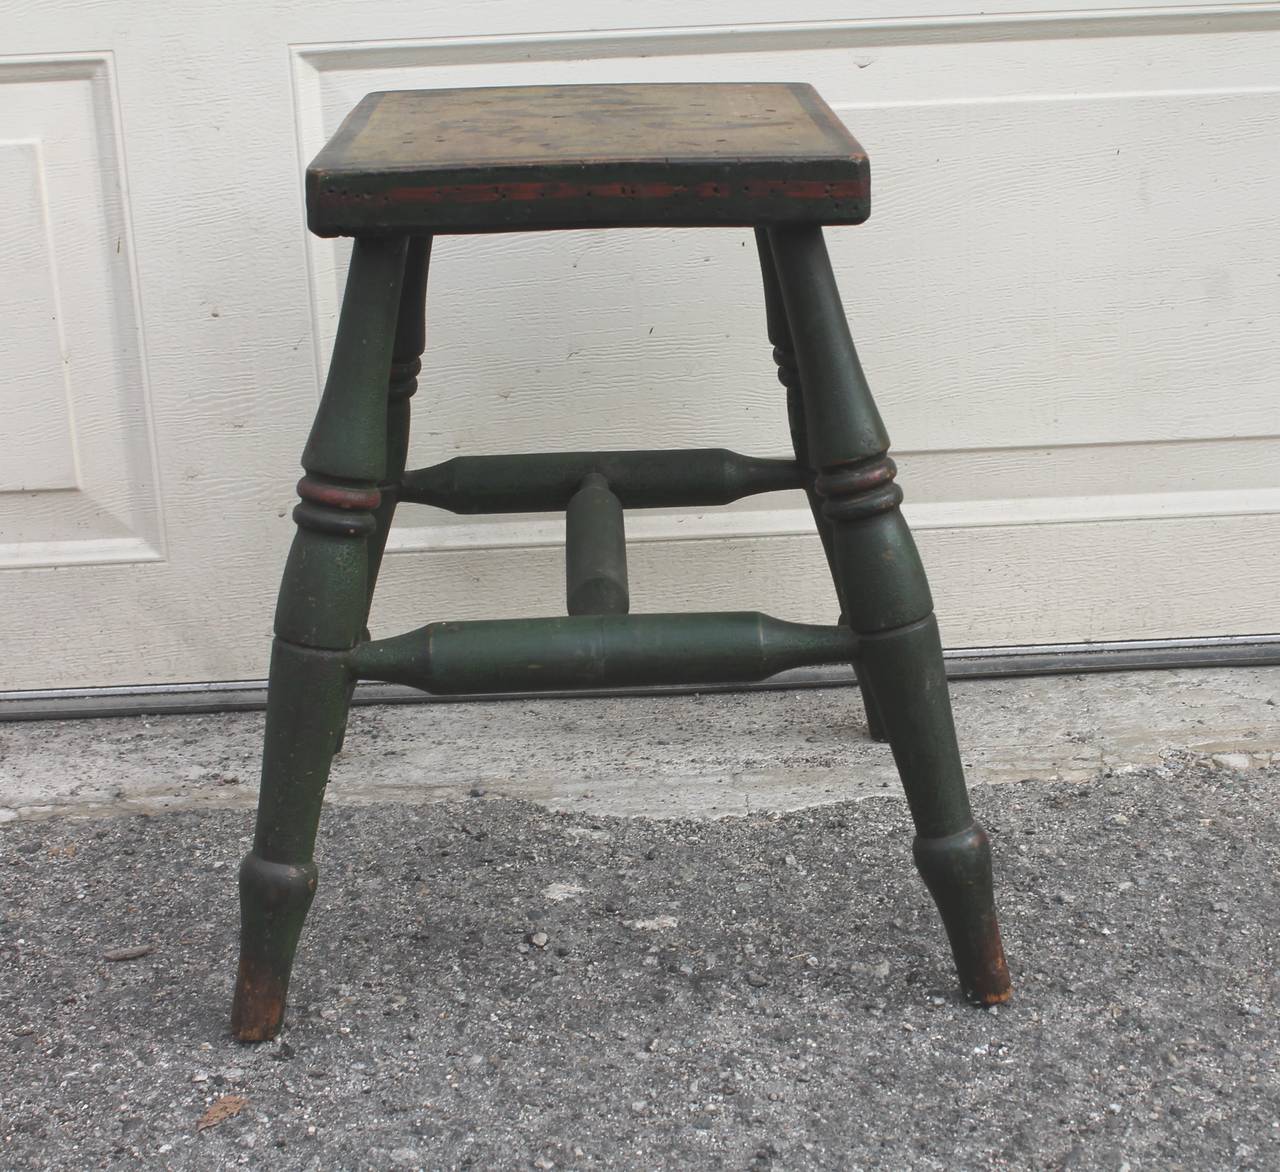 19th Century Fry's Cocoa Advertising Bench in Original Paint 1